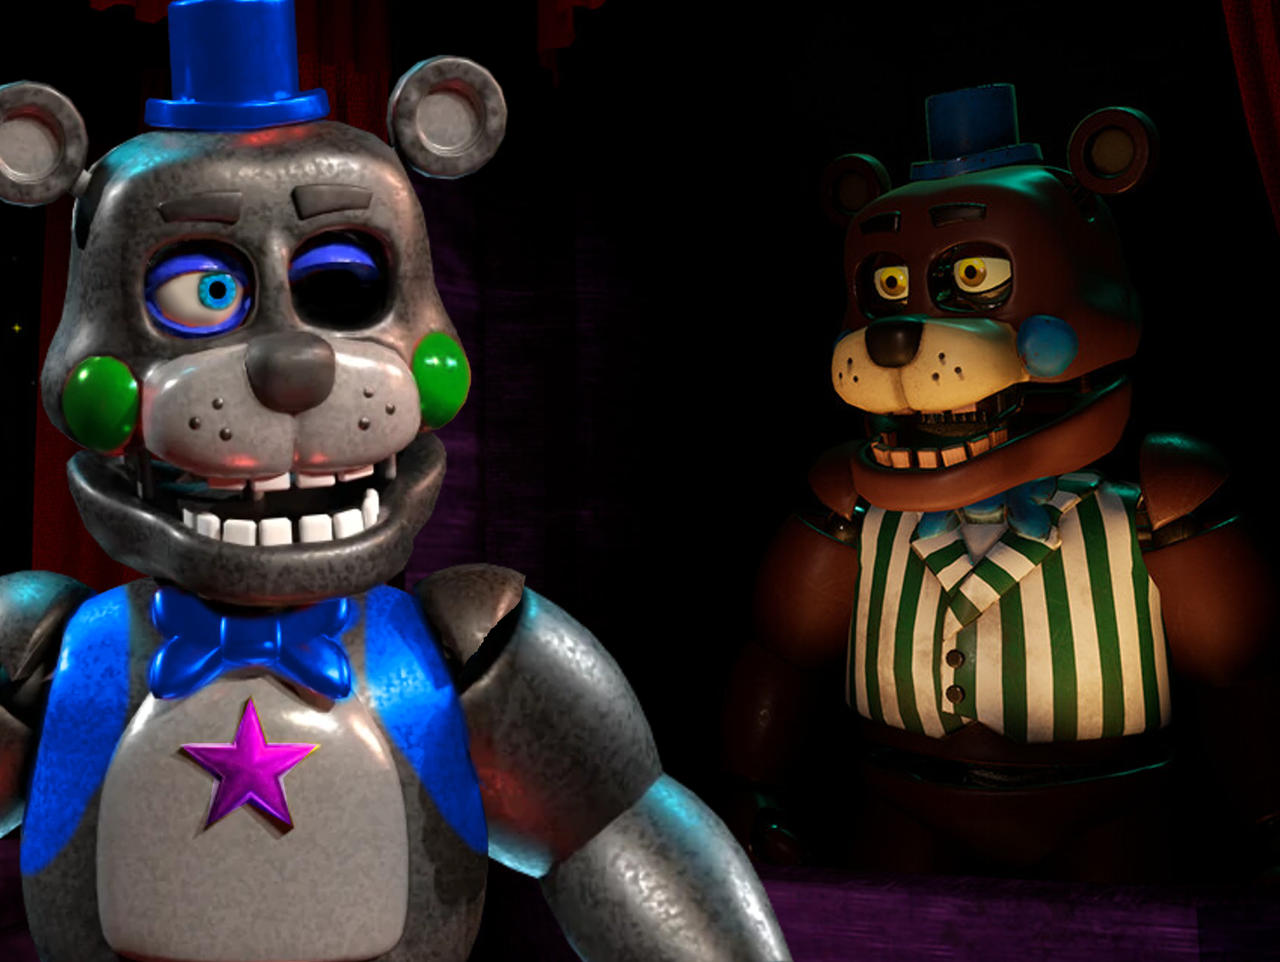 I made custom steam covers for TJoC SM and fazbear entertainment storage  using renders on their gamejolt pages, thought I'd post them here :  r/fivenightsatfreddys